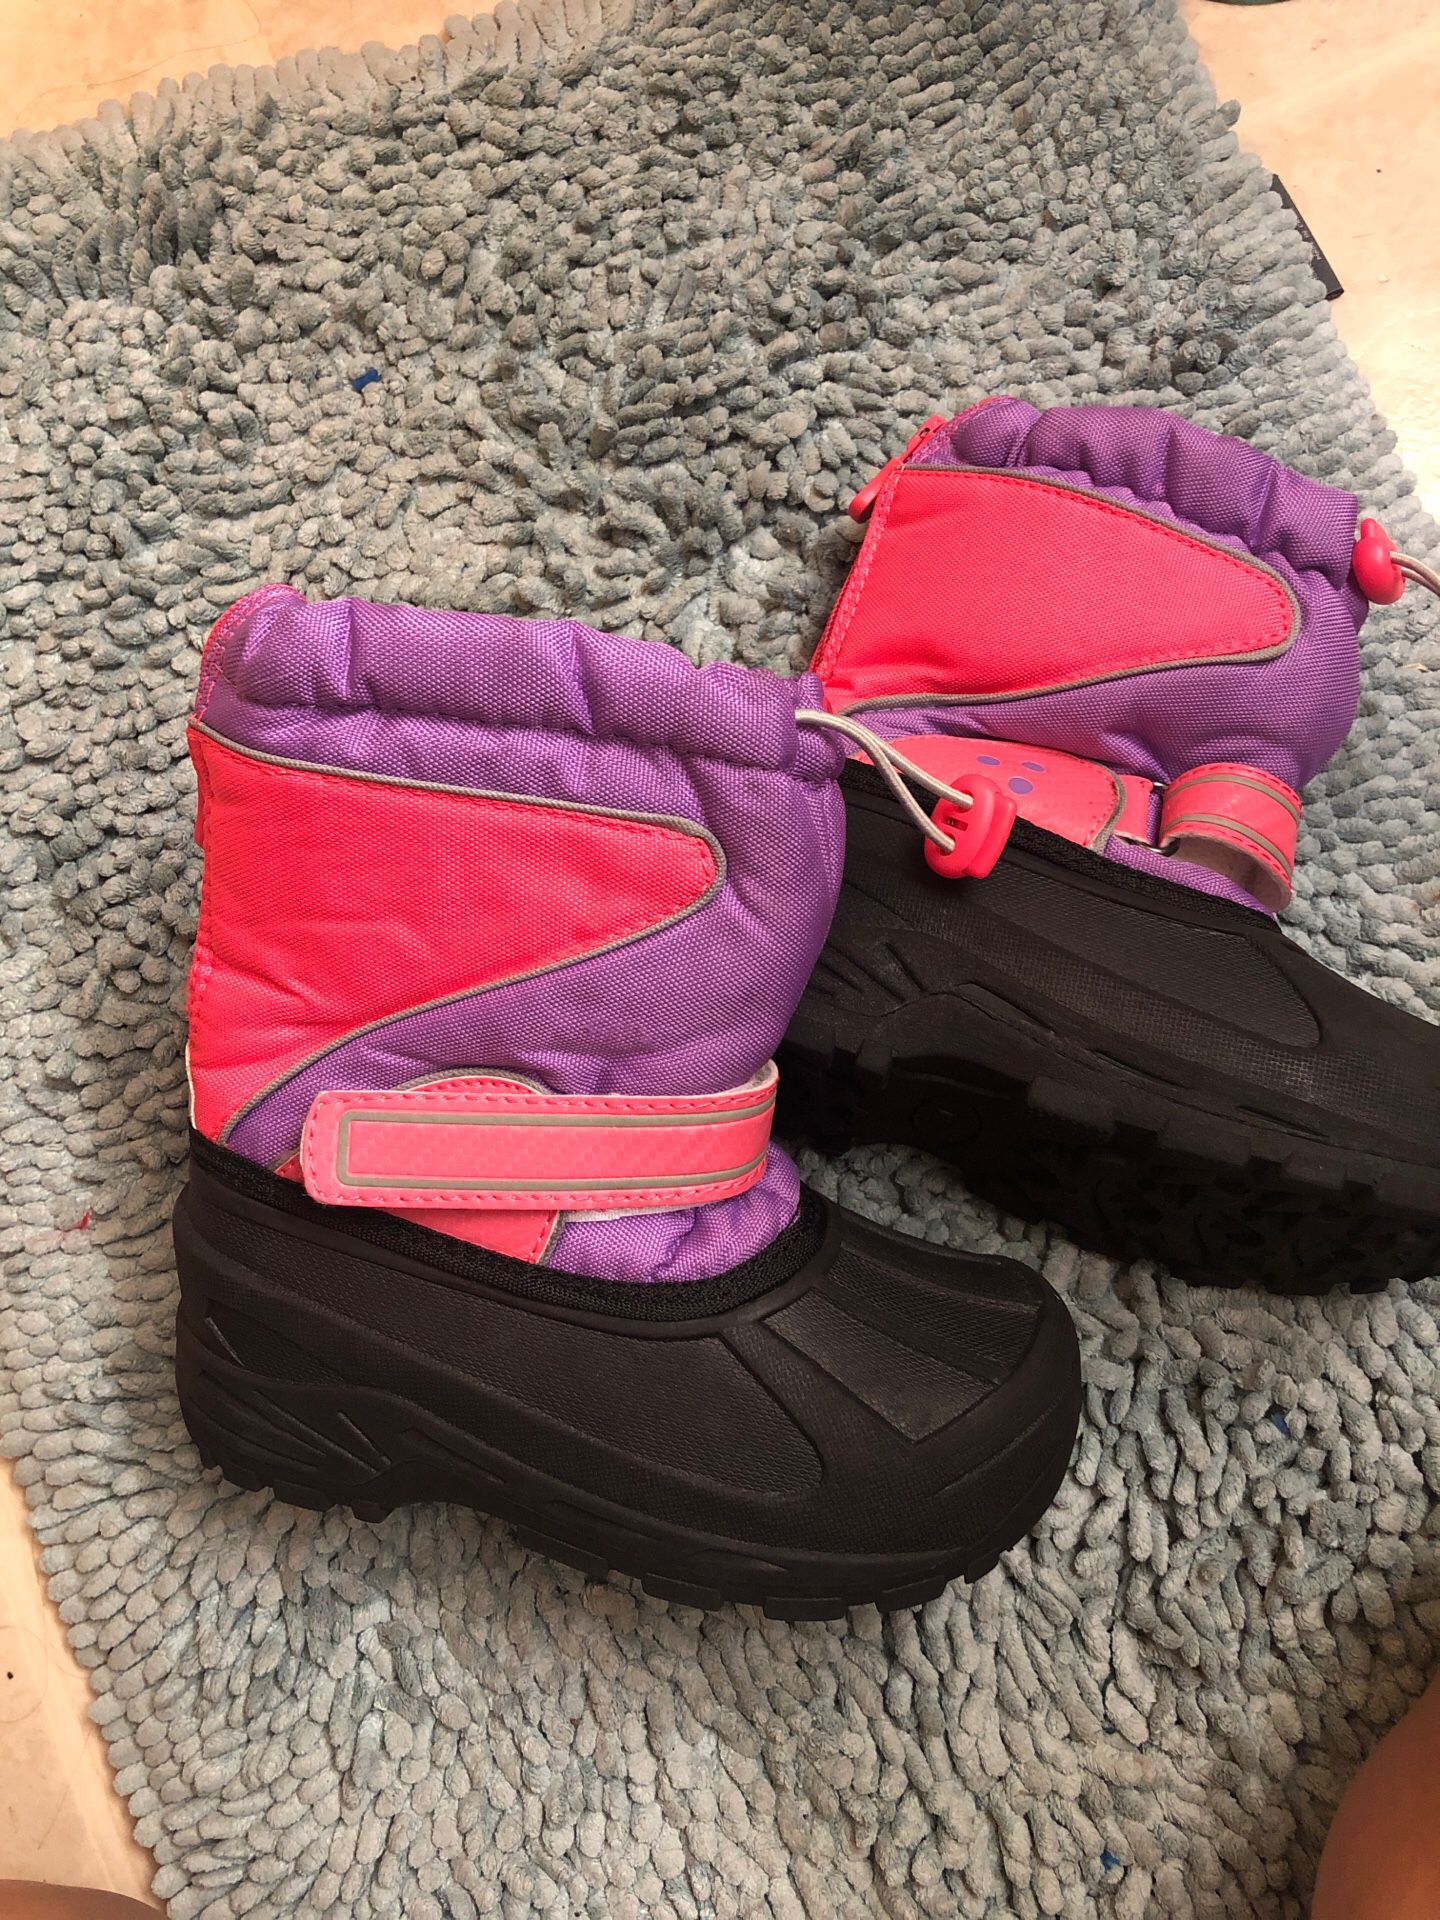 Snow boots for girls size 11/12 Pick up near union station in Los Angeles $15 excellent condition